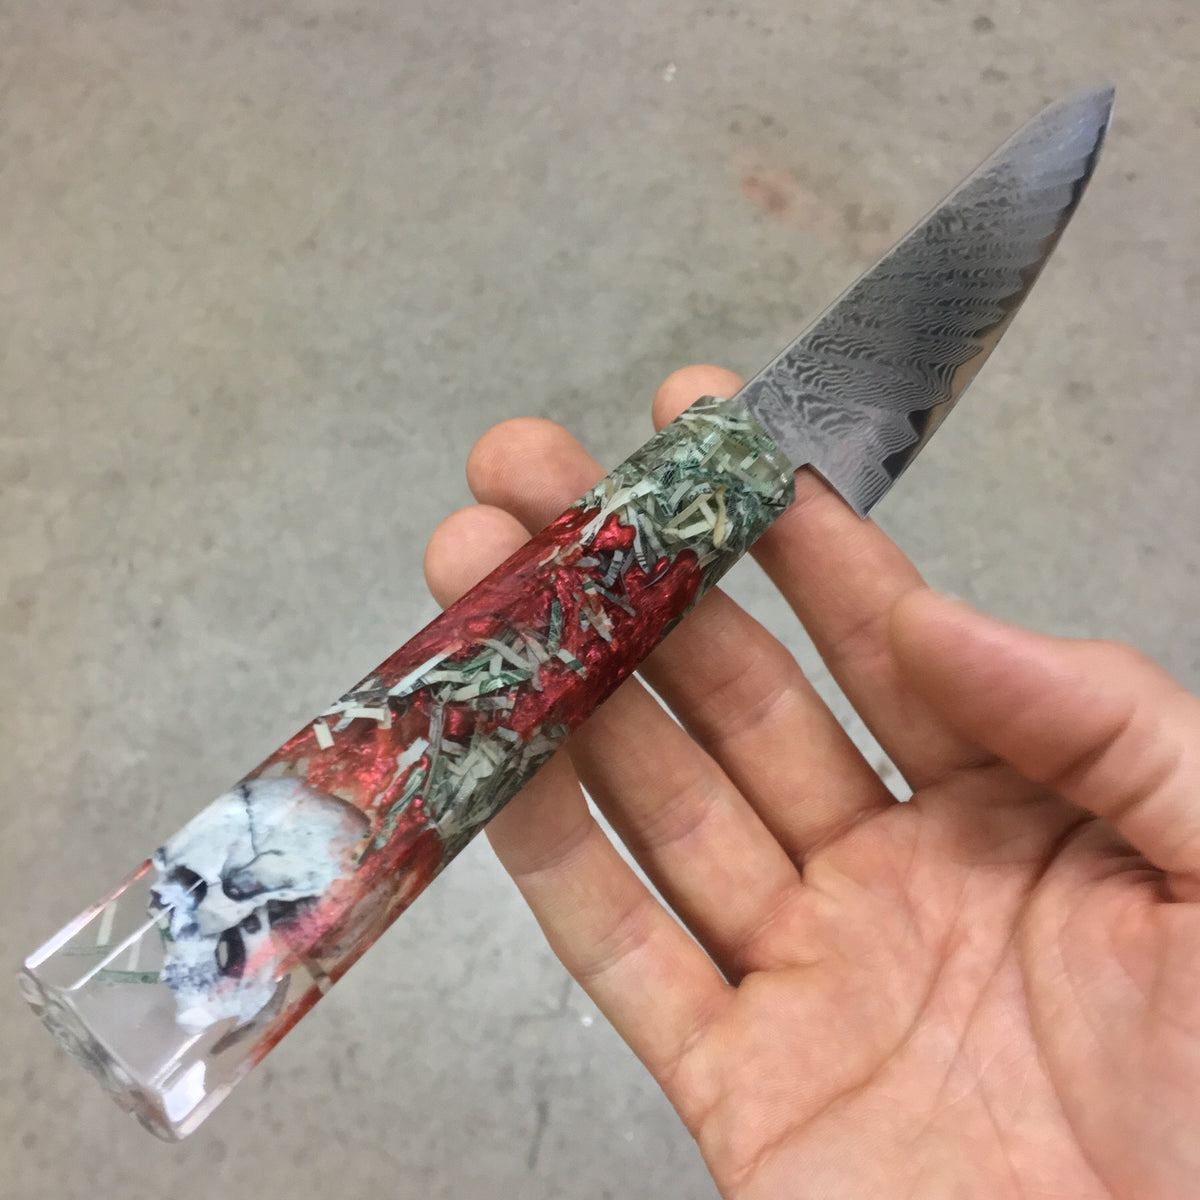 Dead Presidents - 6in Damascus Petty Culinary Knife